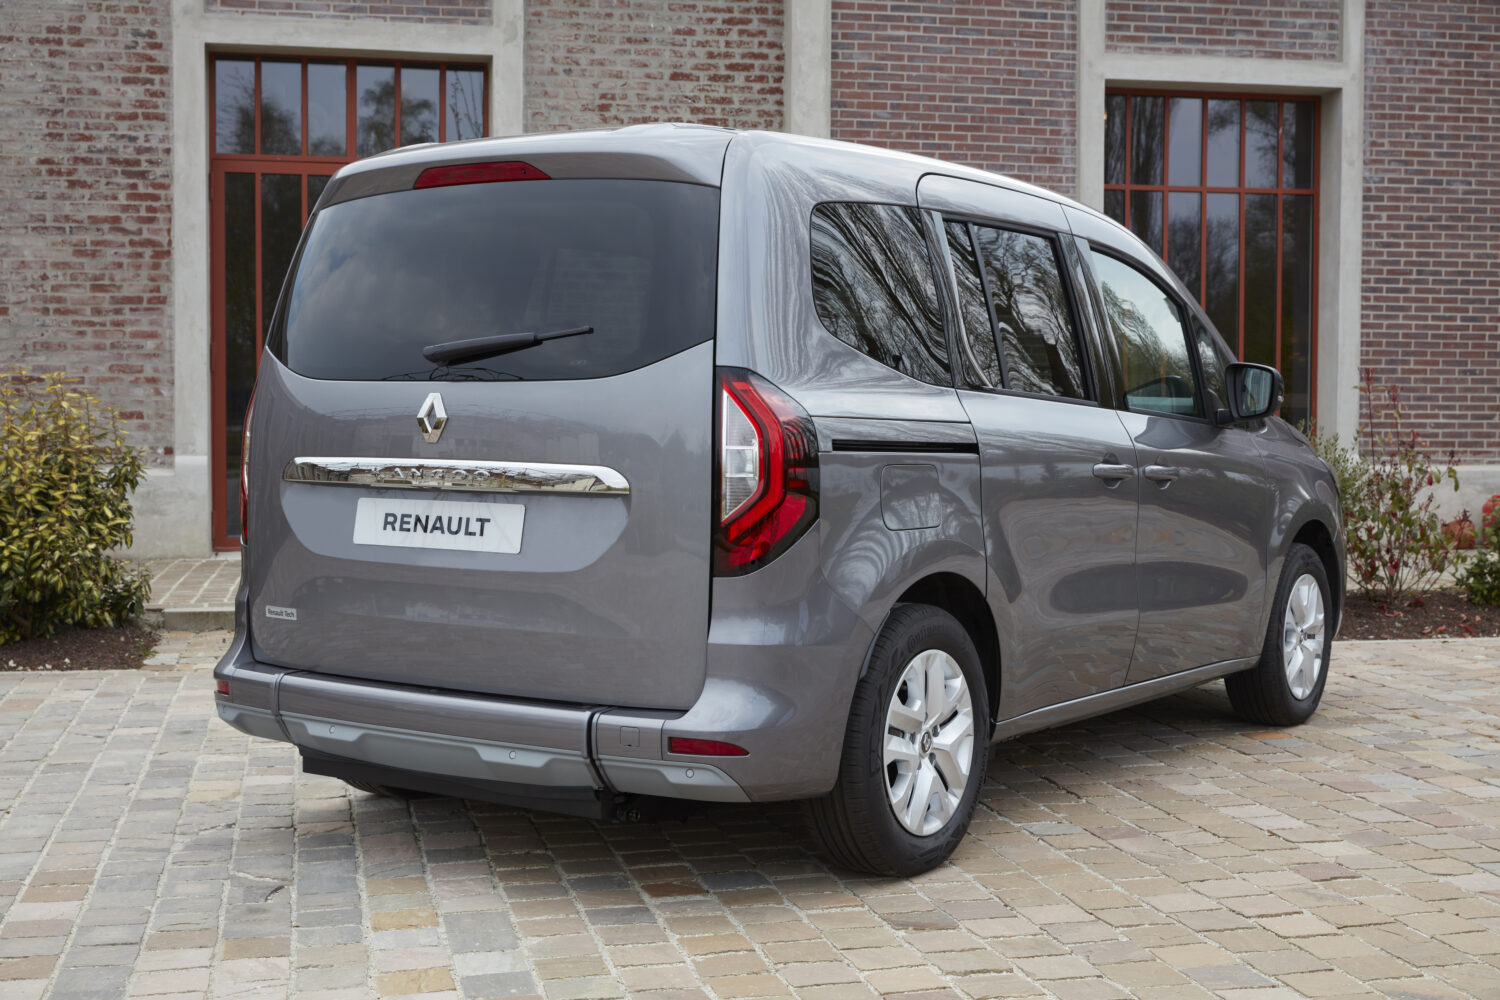 2021 - New Renault Kangoo - Tests drive - Transport For People With Reduced Mobility - TPRM